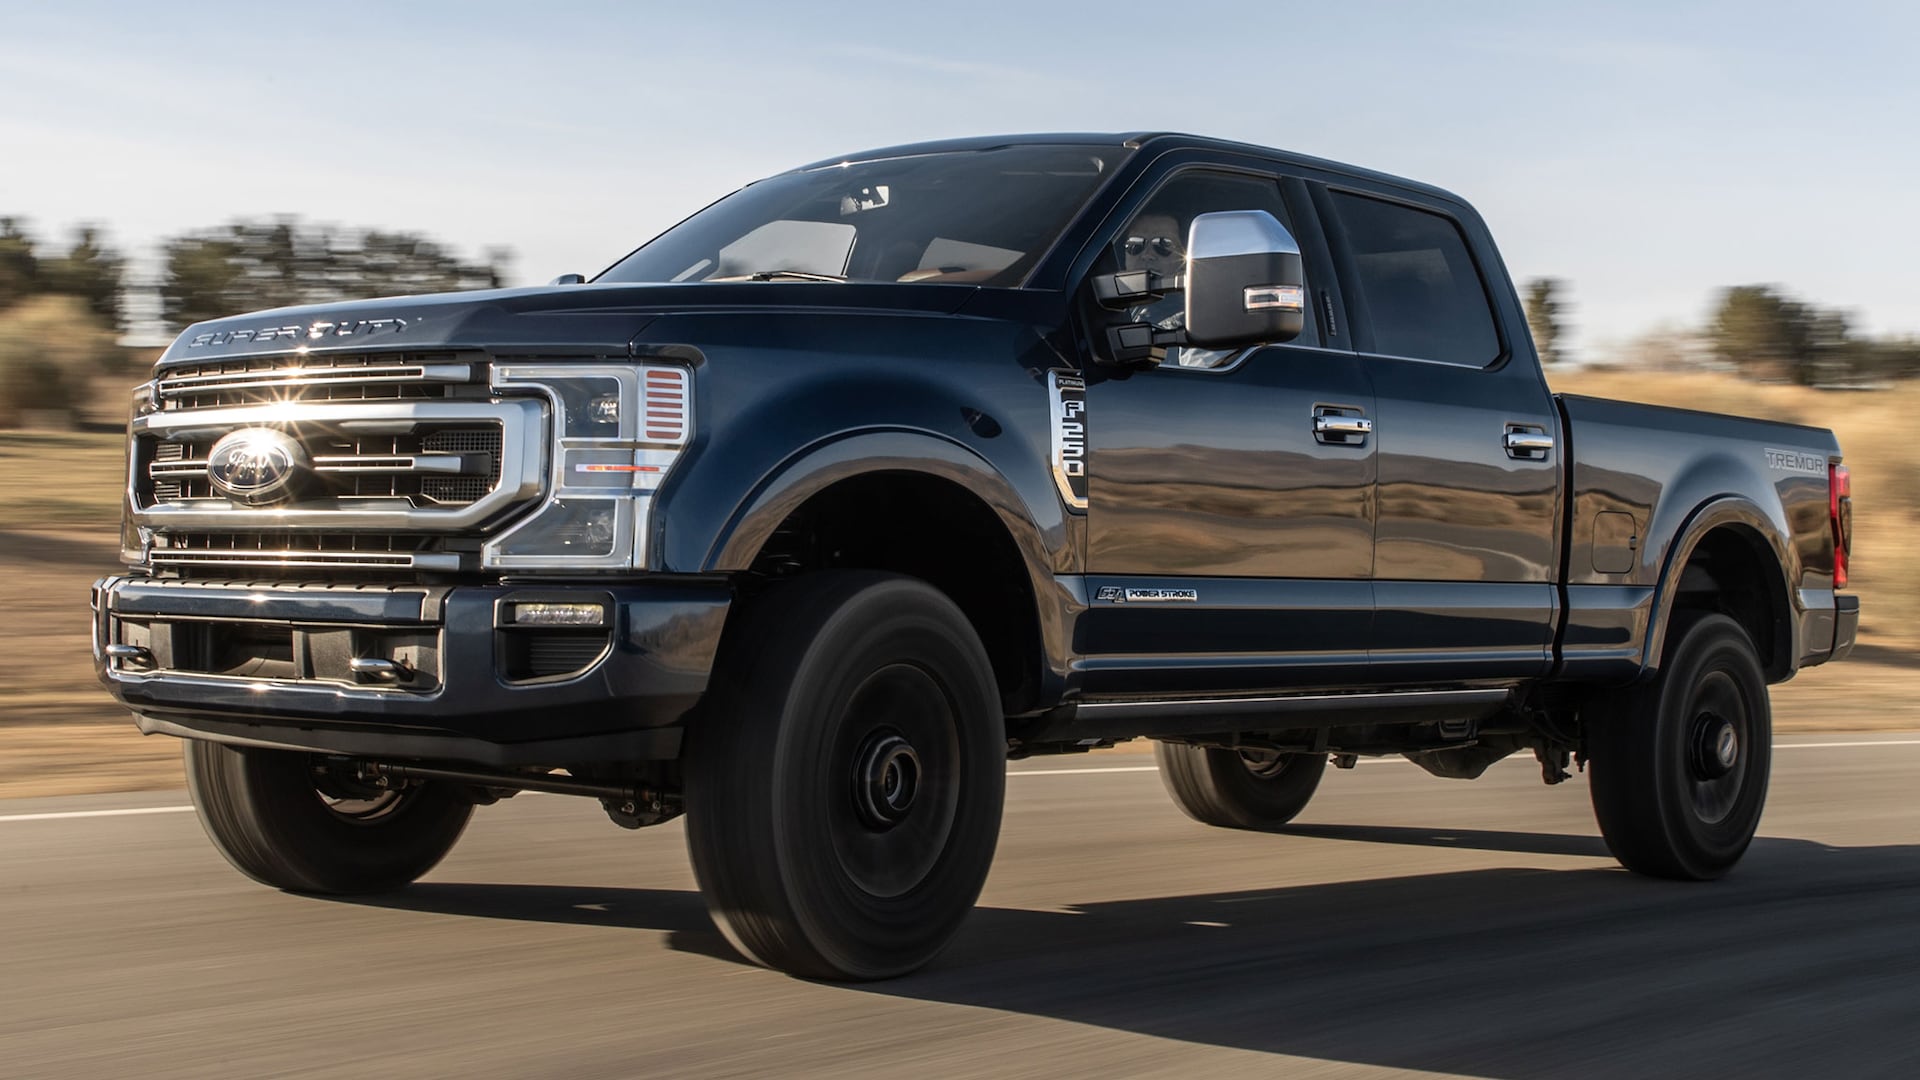 2020 Ford F-250 Super Duty Tremor Diesel First Test: An Unstoppable Force